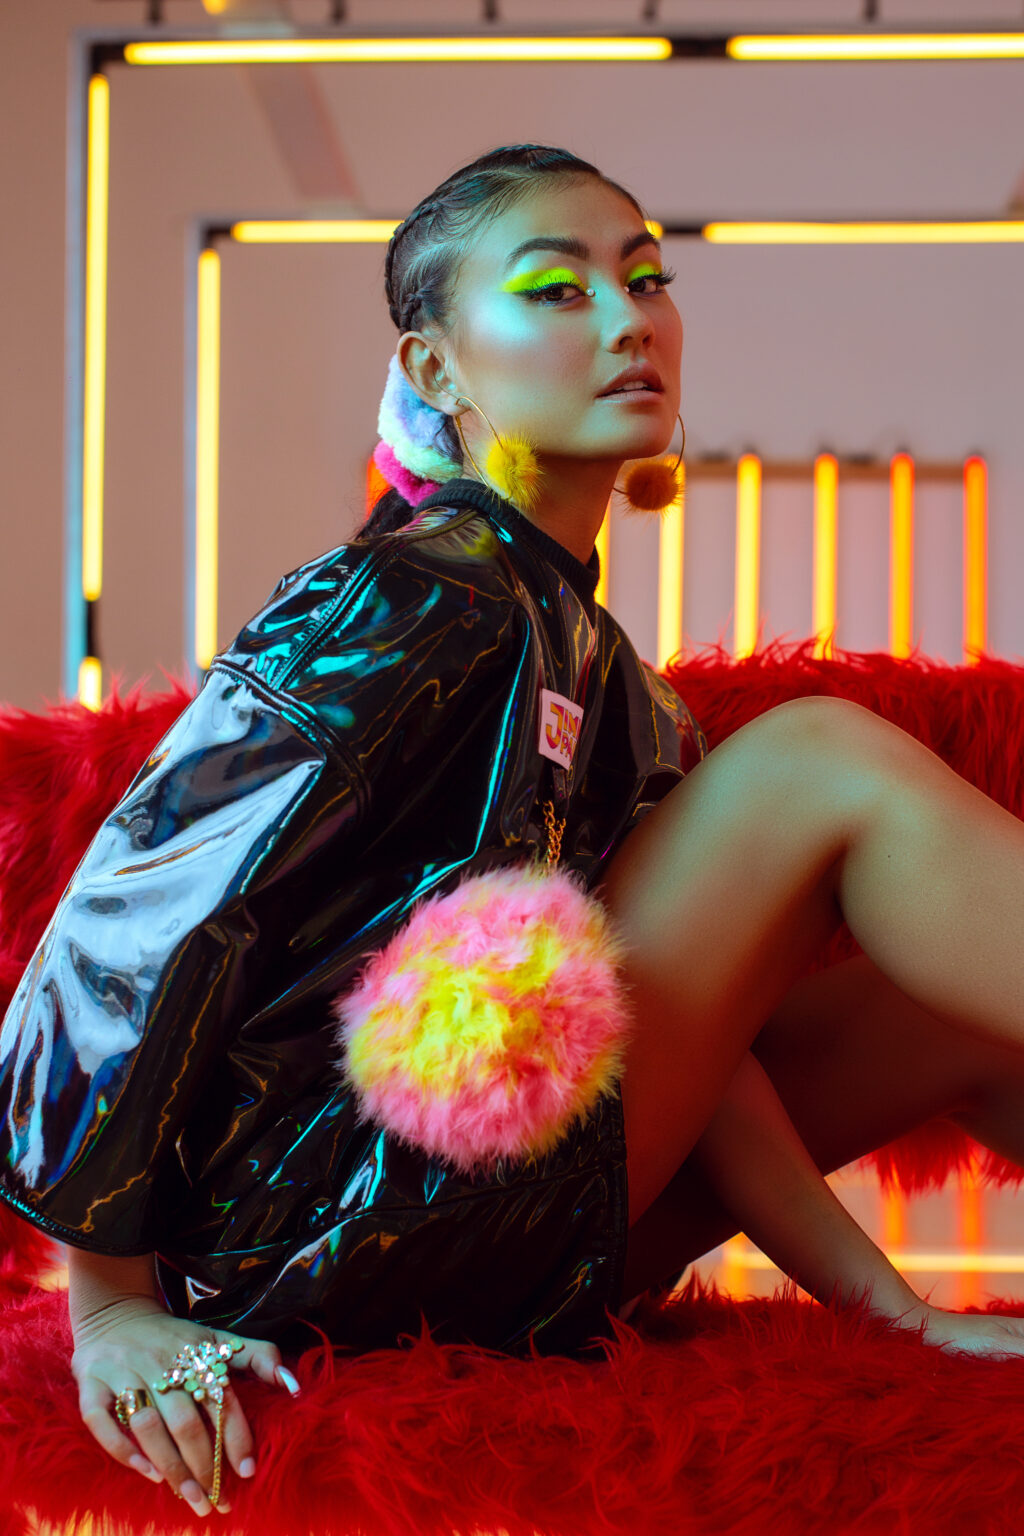 DREAM, BELIEVE, MAKE IT HAPPEN: An Interview with Agnez Mo